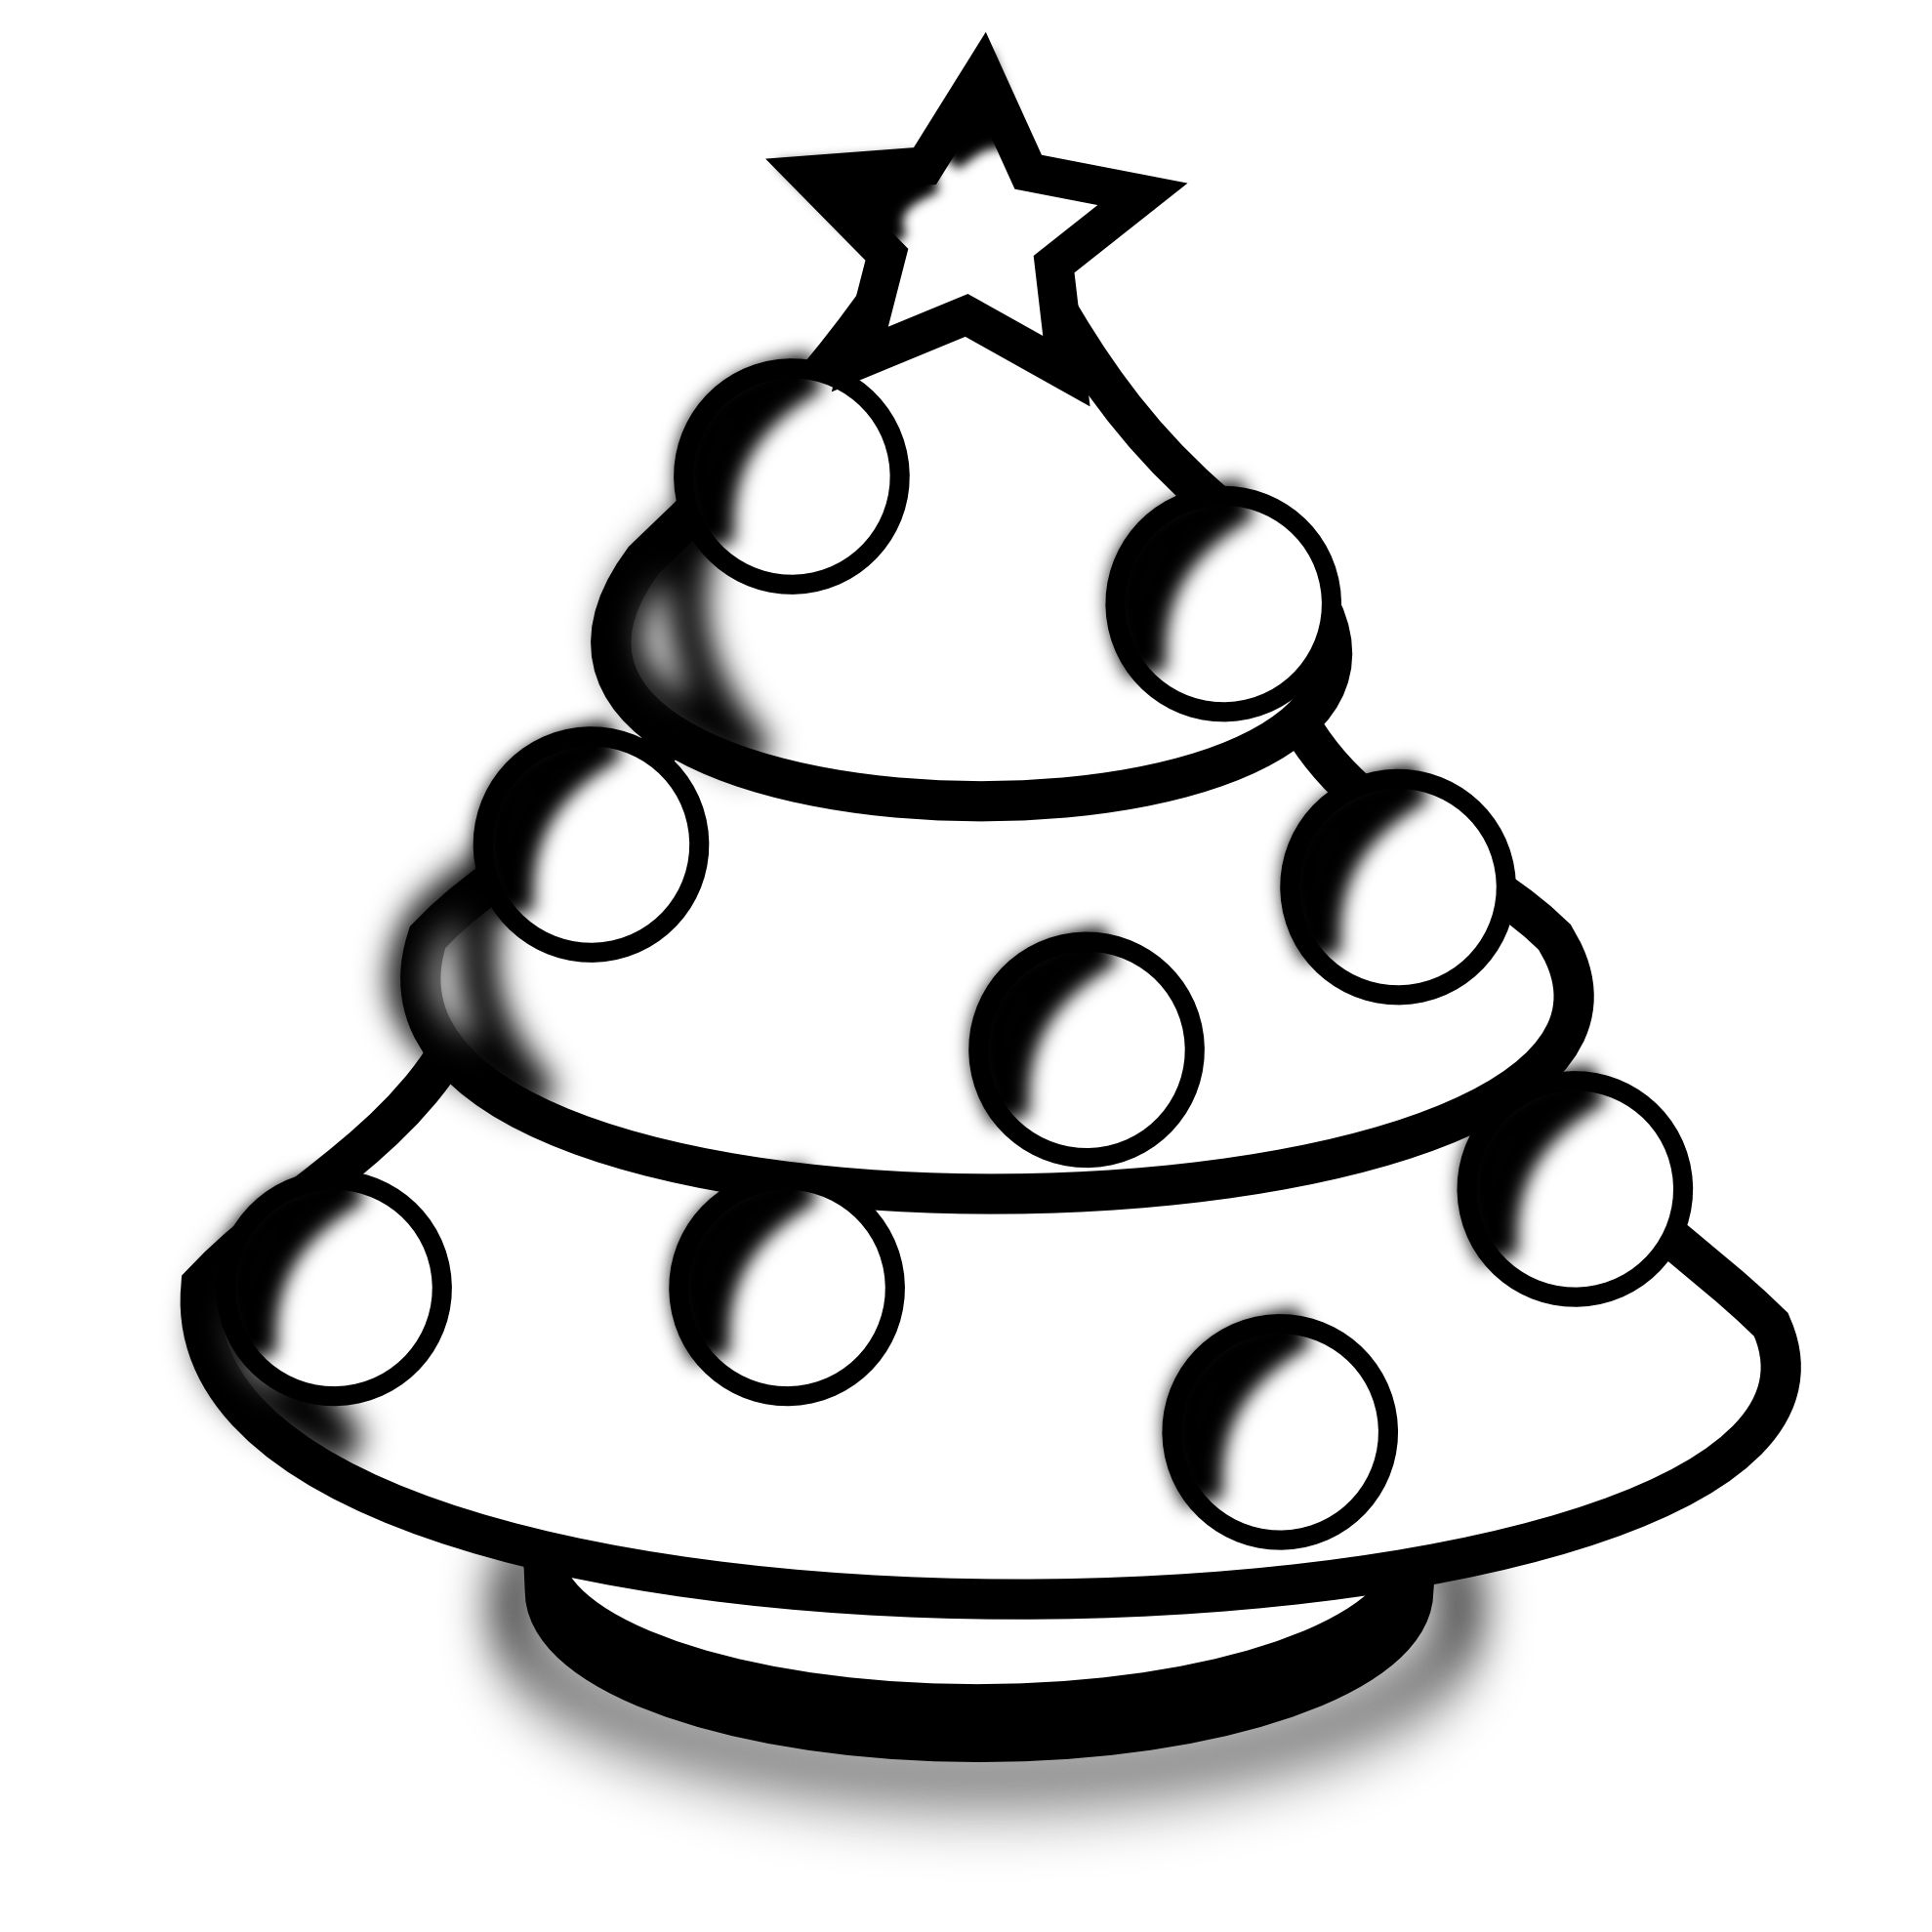 Merry Christmas Clip Art Black And White Background - Christmas Clip Art Black White Png - HD Wallpaper 